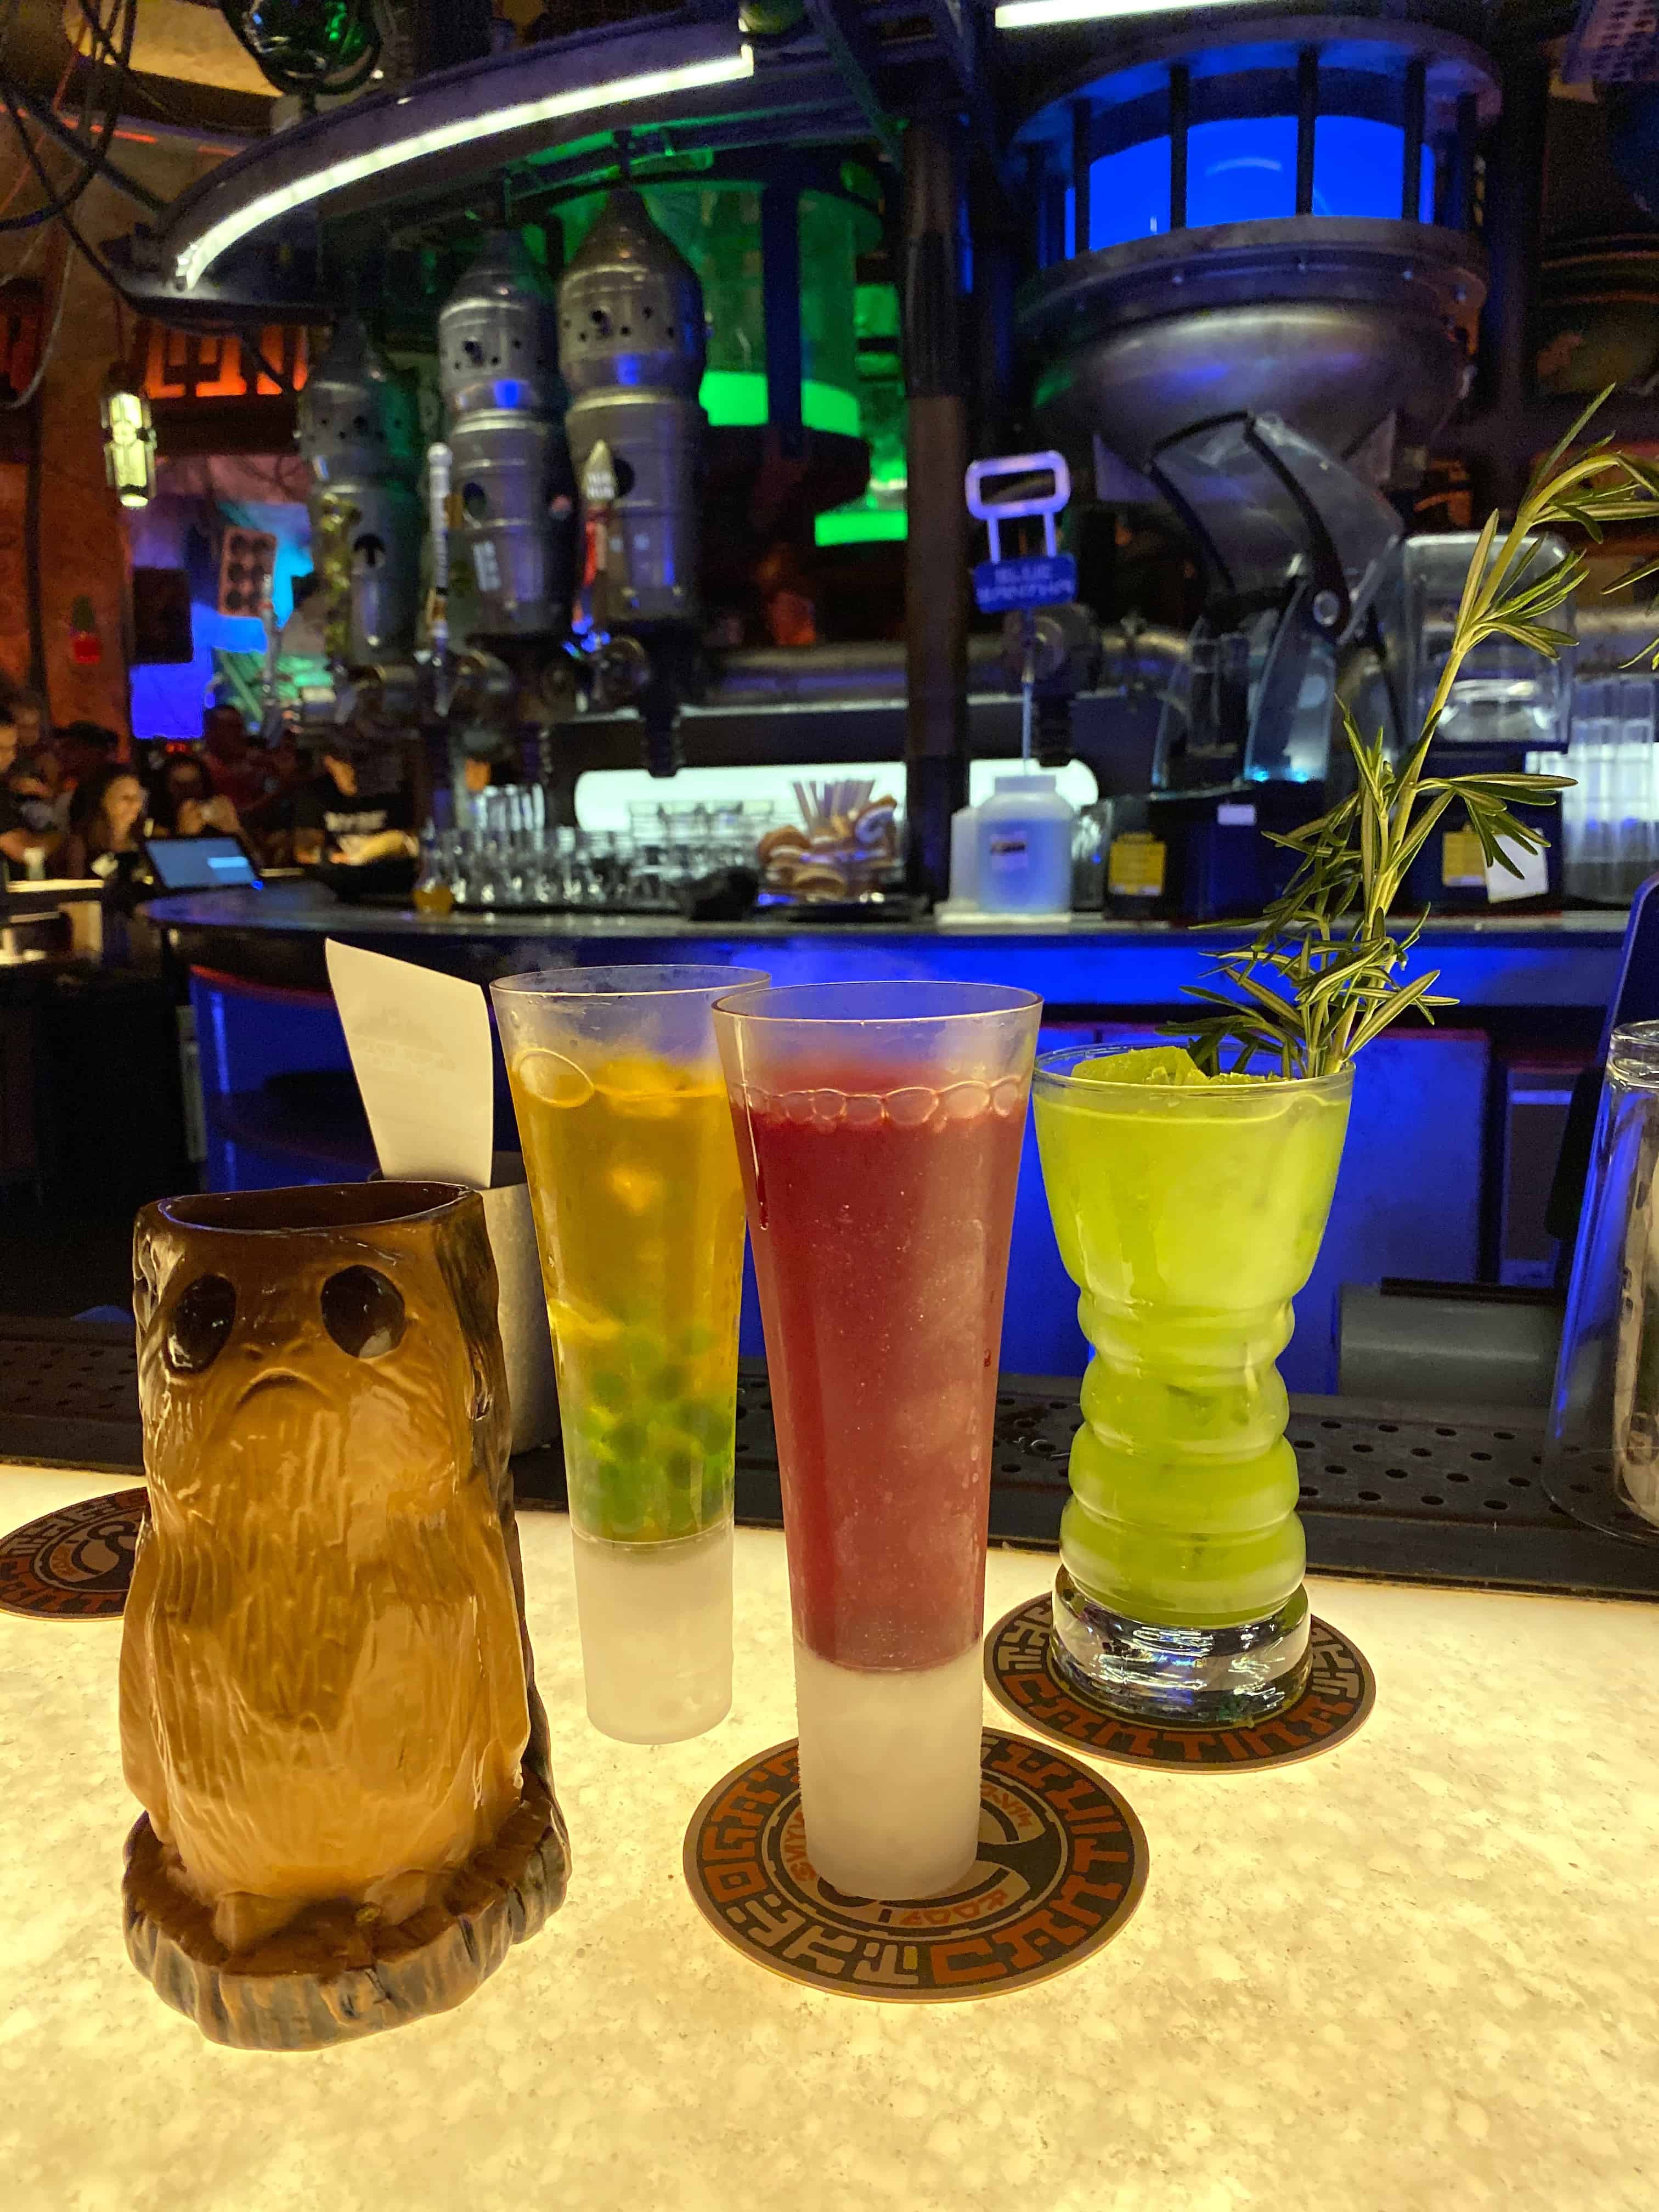 ULTIMATE DRINK GUIDE TO OGA'S CANTINA AT STAR WARS: GALAXY'S EDGE